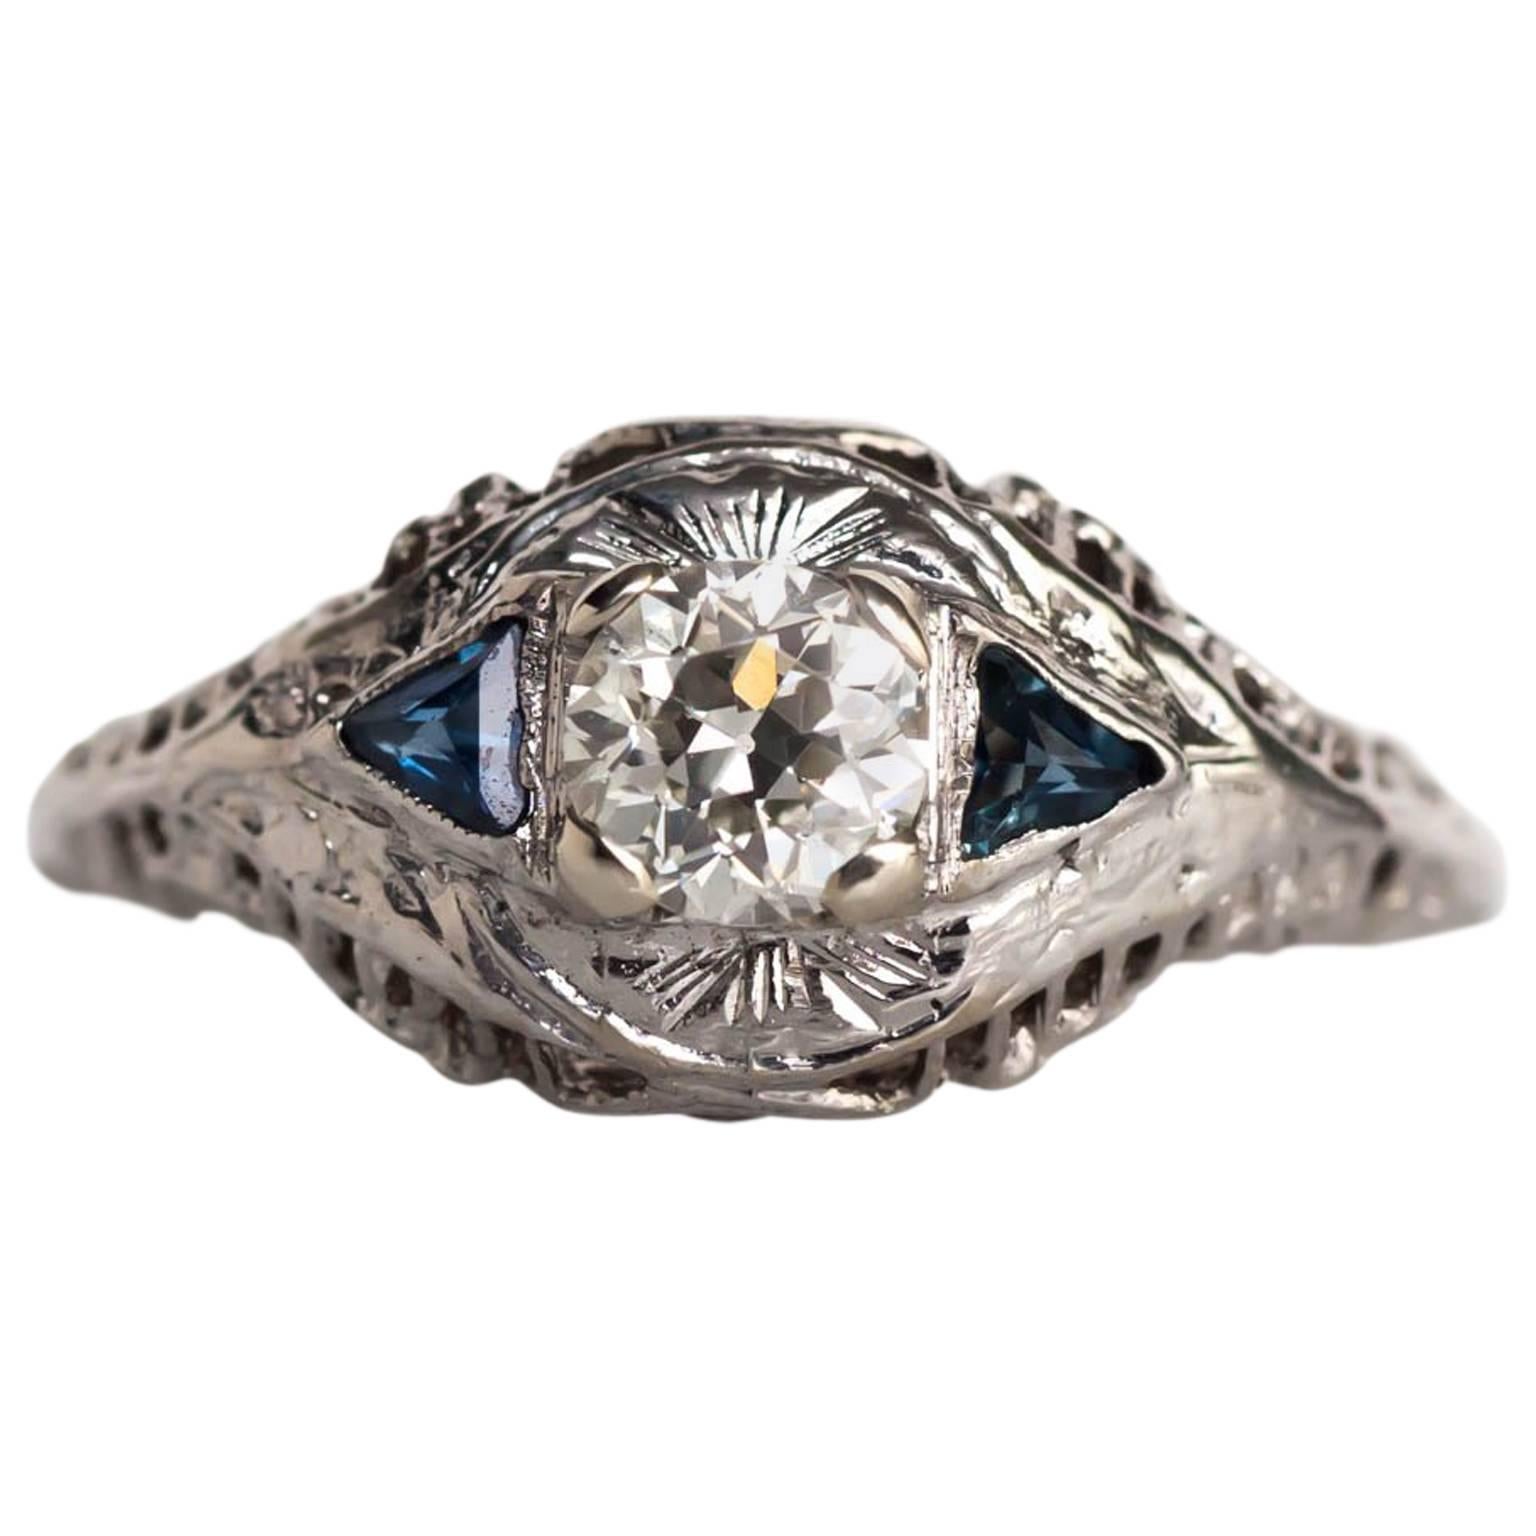 1930S Art Deco Gia Certified .35 Carat Diamond White Gold Engagement Ring  For Sale At 1Stdibs | .35 Carat Diamond Ring, .35 Carat Diamond Size, Ring  Size 35